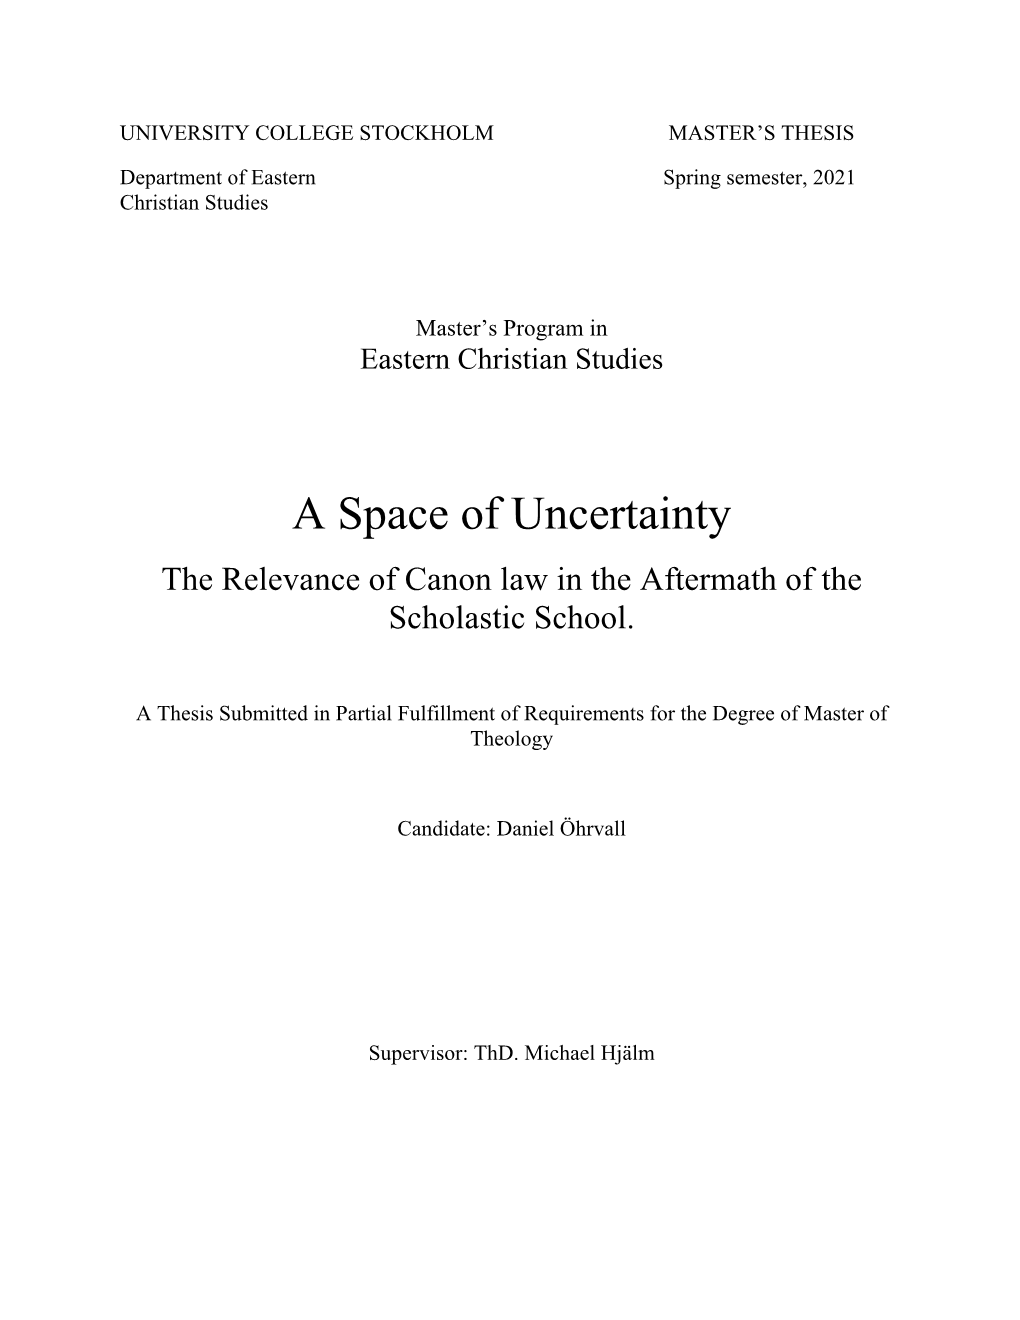 A Space of Uncertainty the Relevance of Canon Law in the Aftermath of the Scholastic School